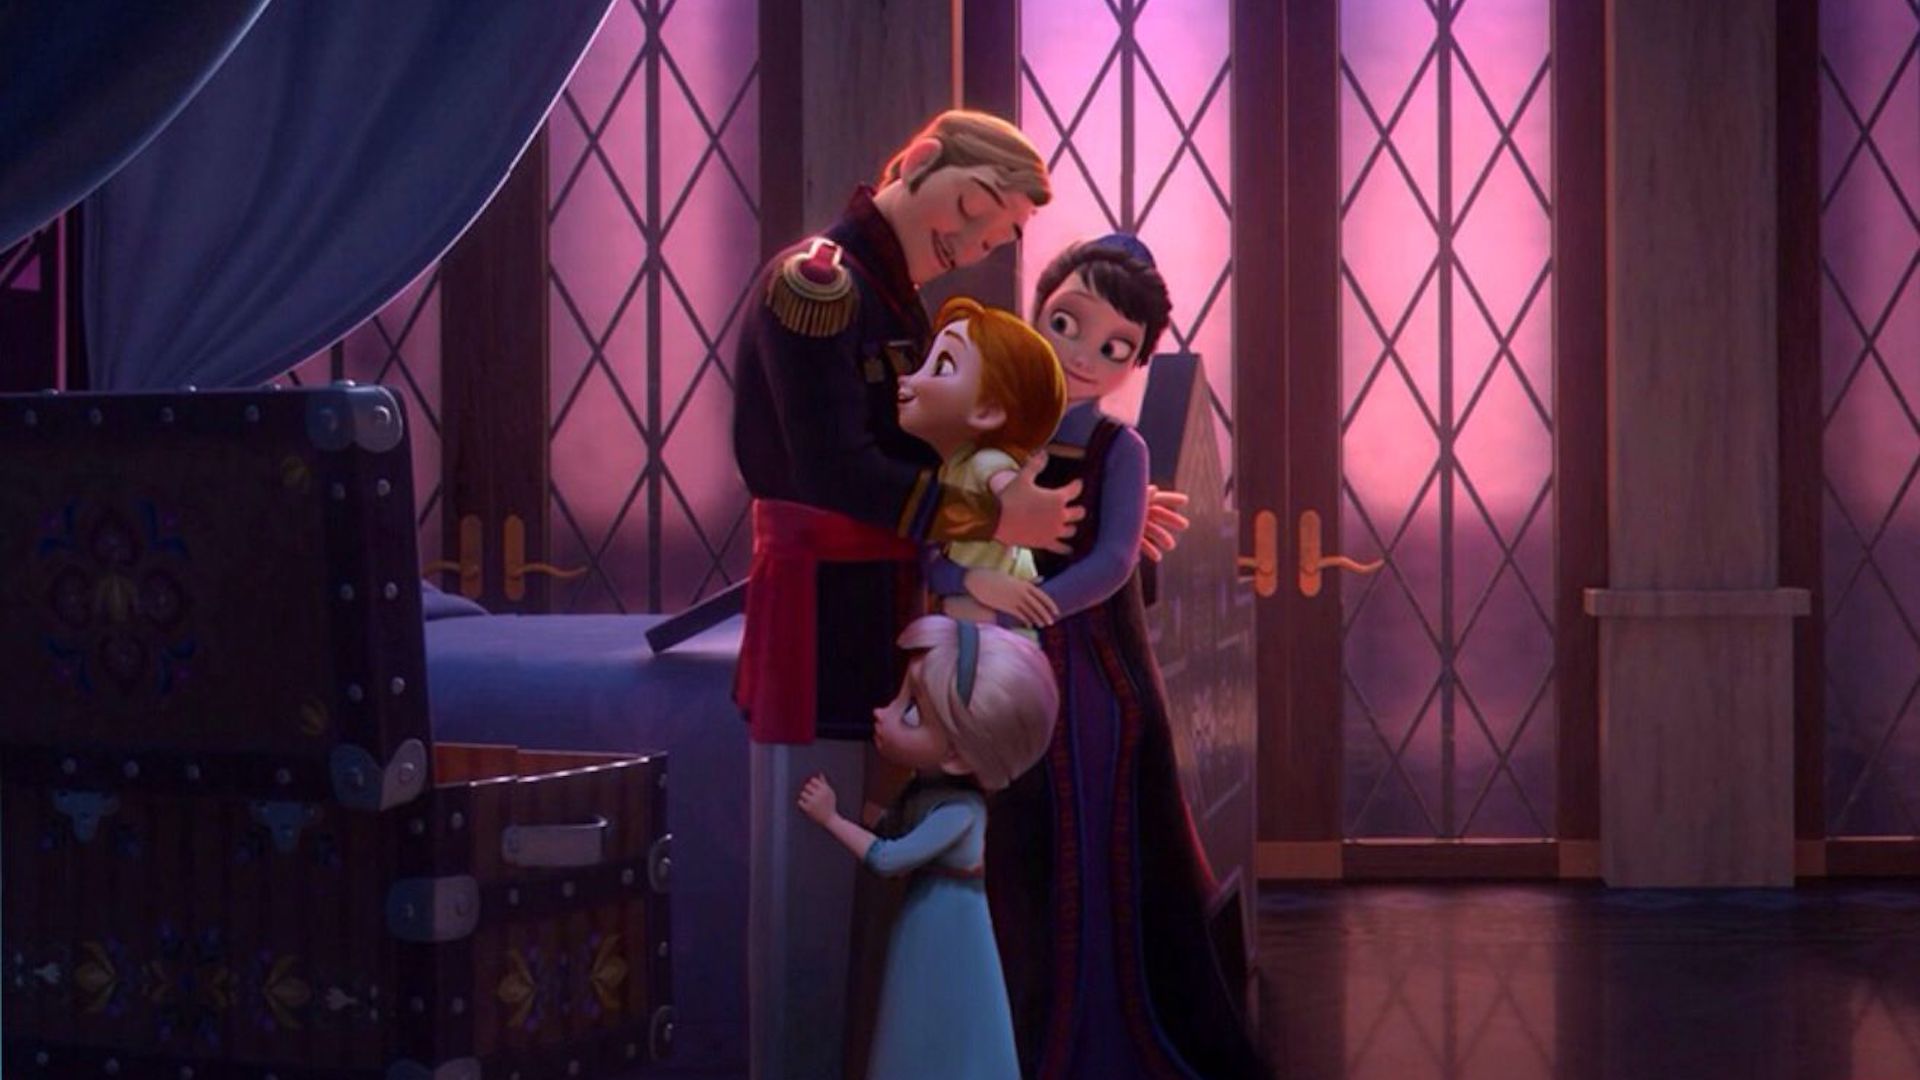 The royal family in Frozen